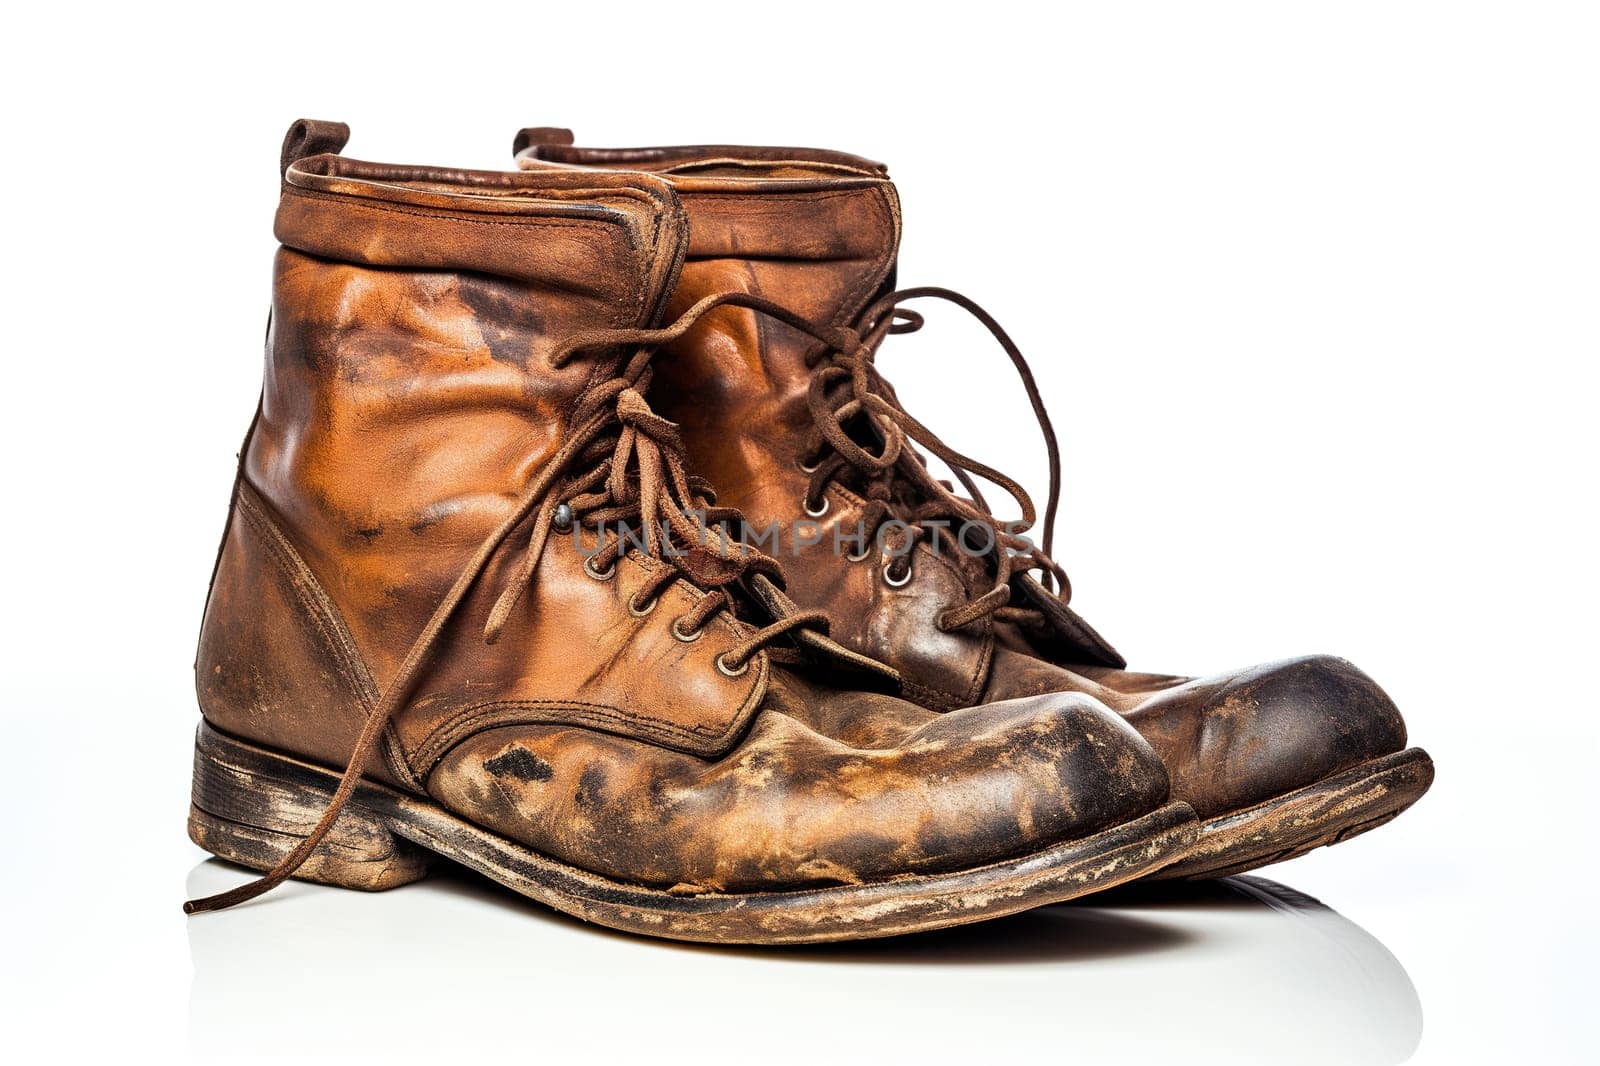 Old worn men's shoes isolated on a white background.